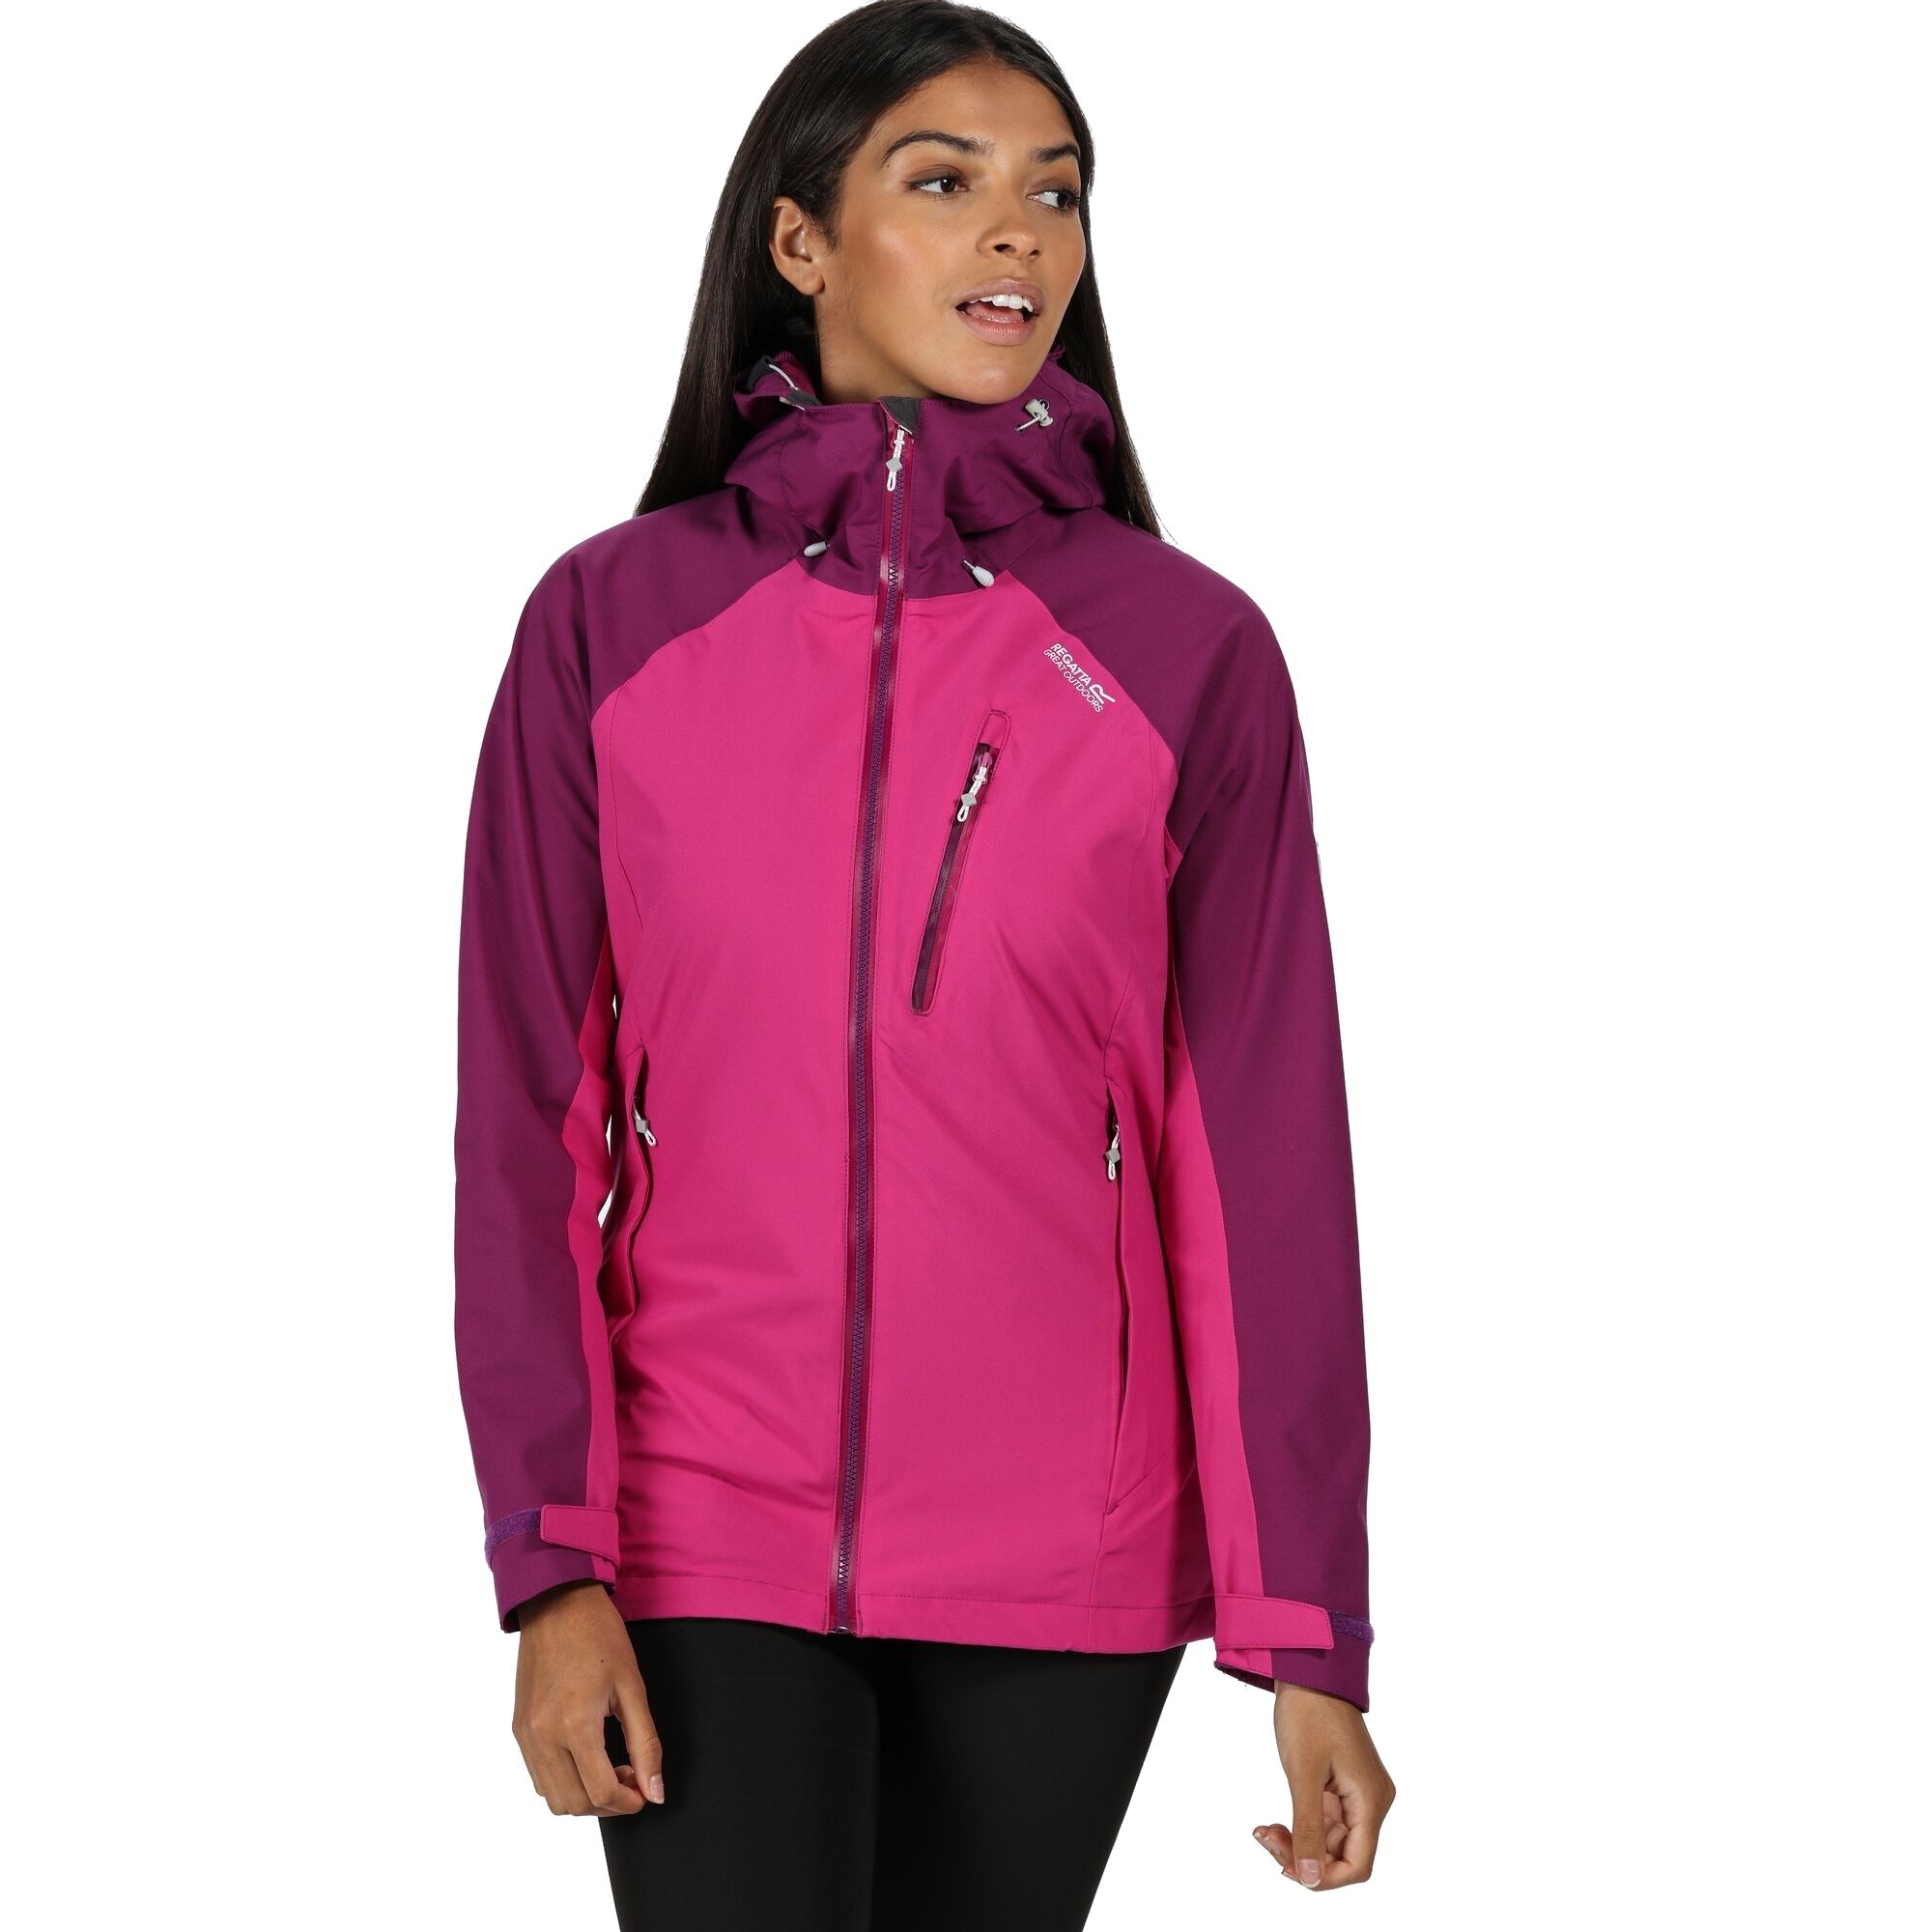 Material: 100% polyester. Breathability rating 10,000g/m2/24hrs. Strategic stretch fabric panels for ease of movement. Durable water repellent finish. Taped seams. Grown on technical hood with adjusters. 2 zipped lower and 1 zipped chest pocket. Inner zipped security pocket. Adjustable shockcord hem.